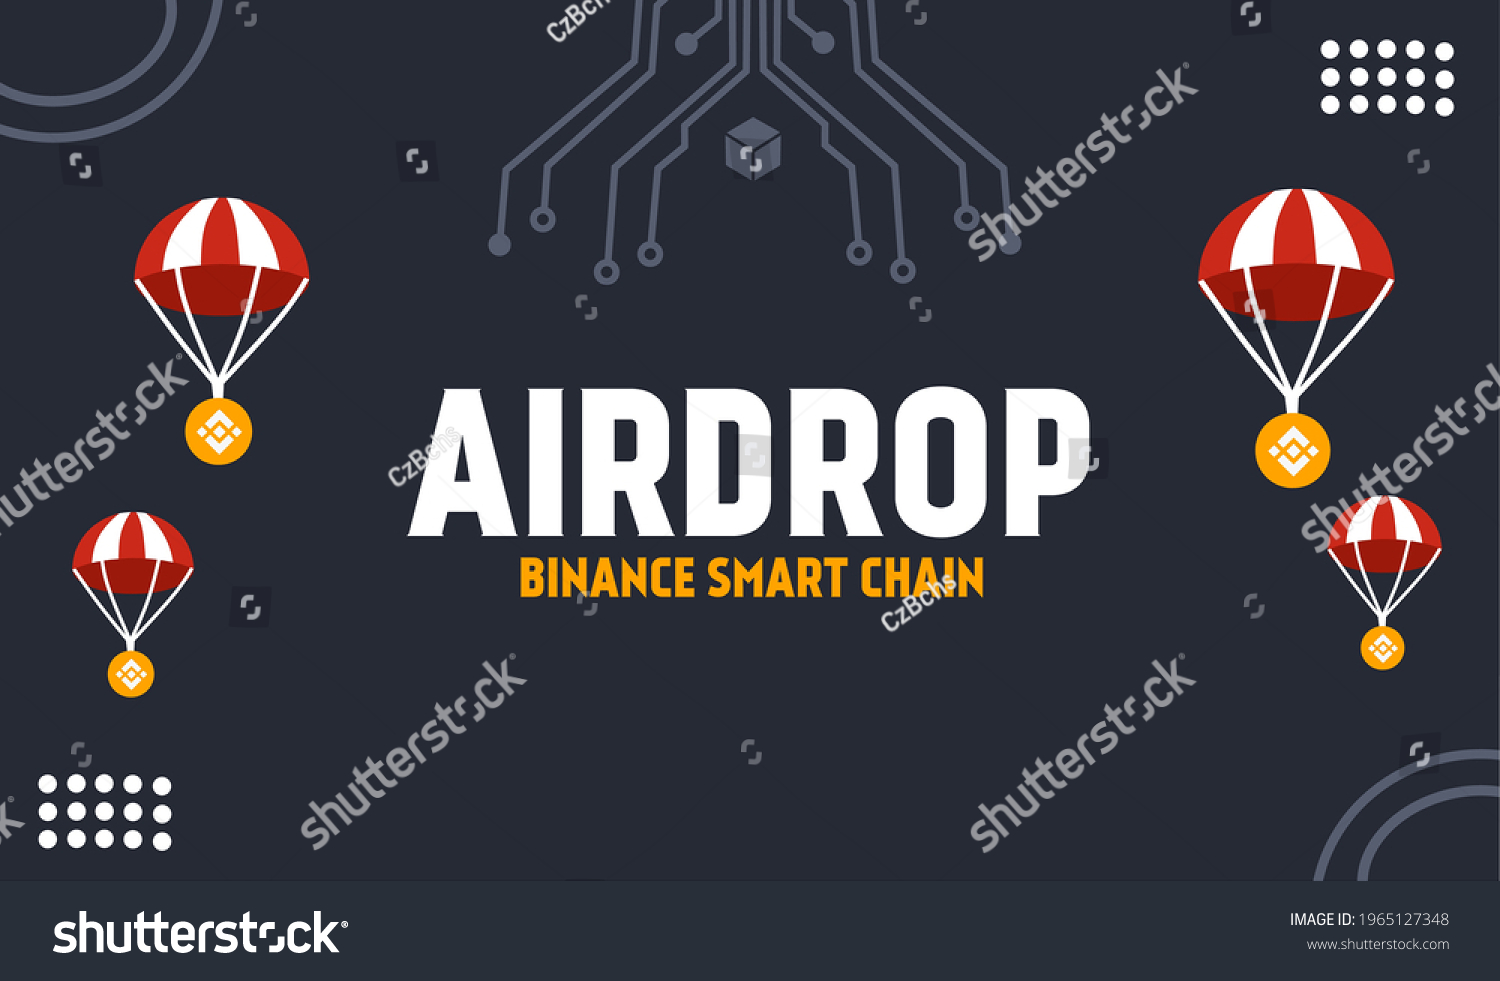 SVG of binance smart chain airdrop on black background with parachute, modern ornament.  illustration for crypto airdrop, financial future.  simple flat minimalist vector eps 10 svg